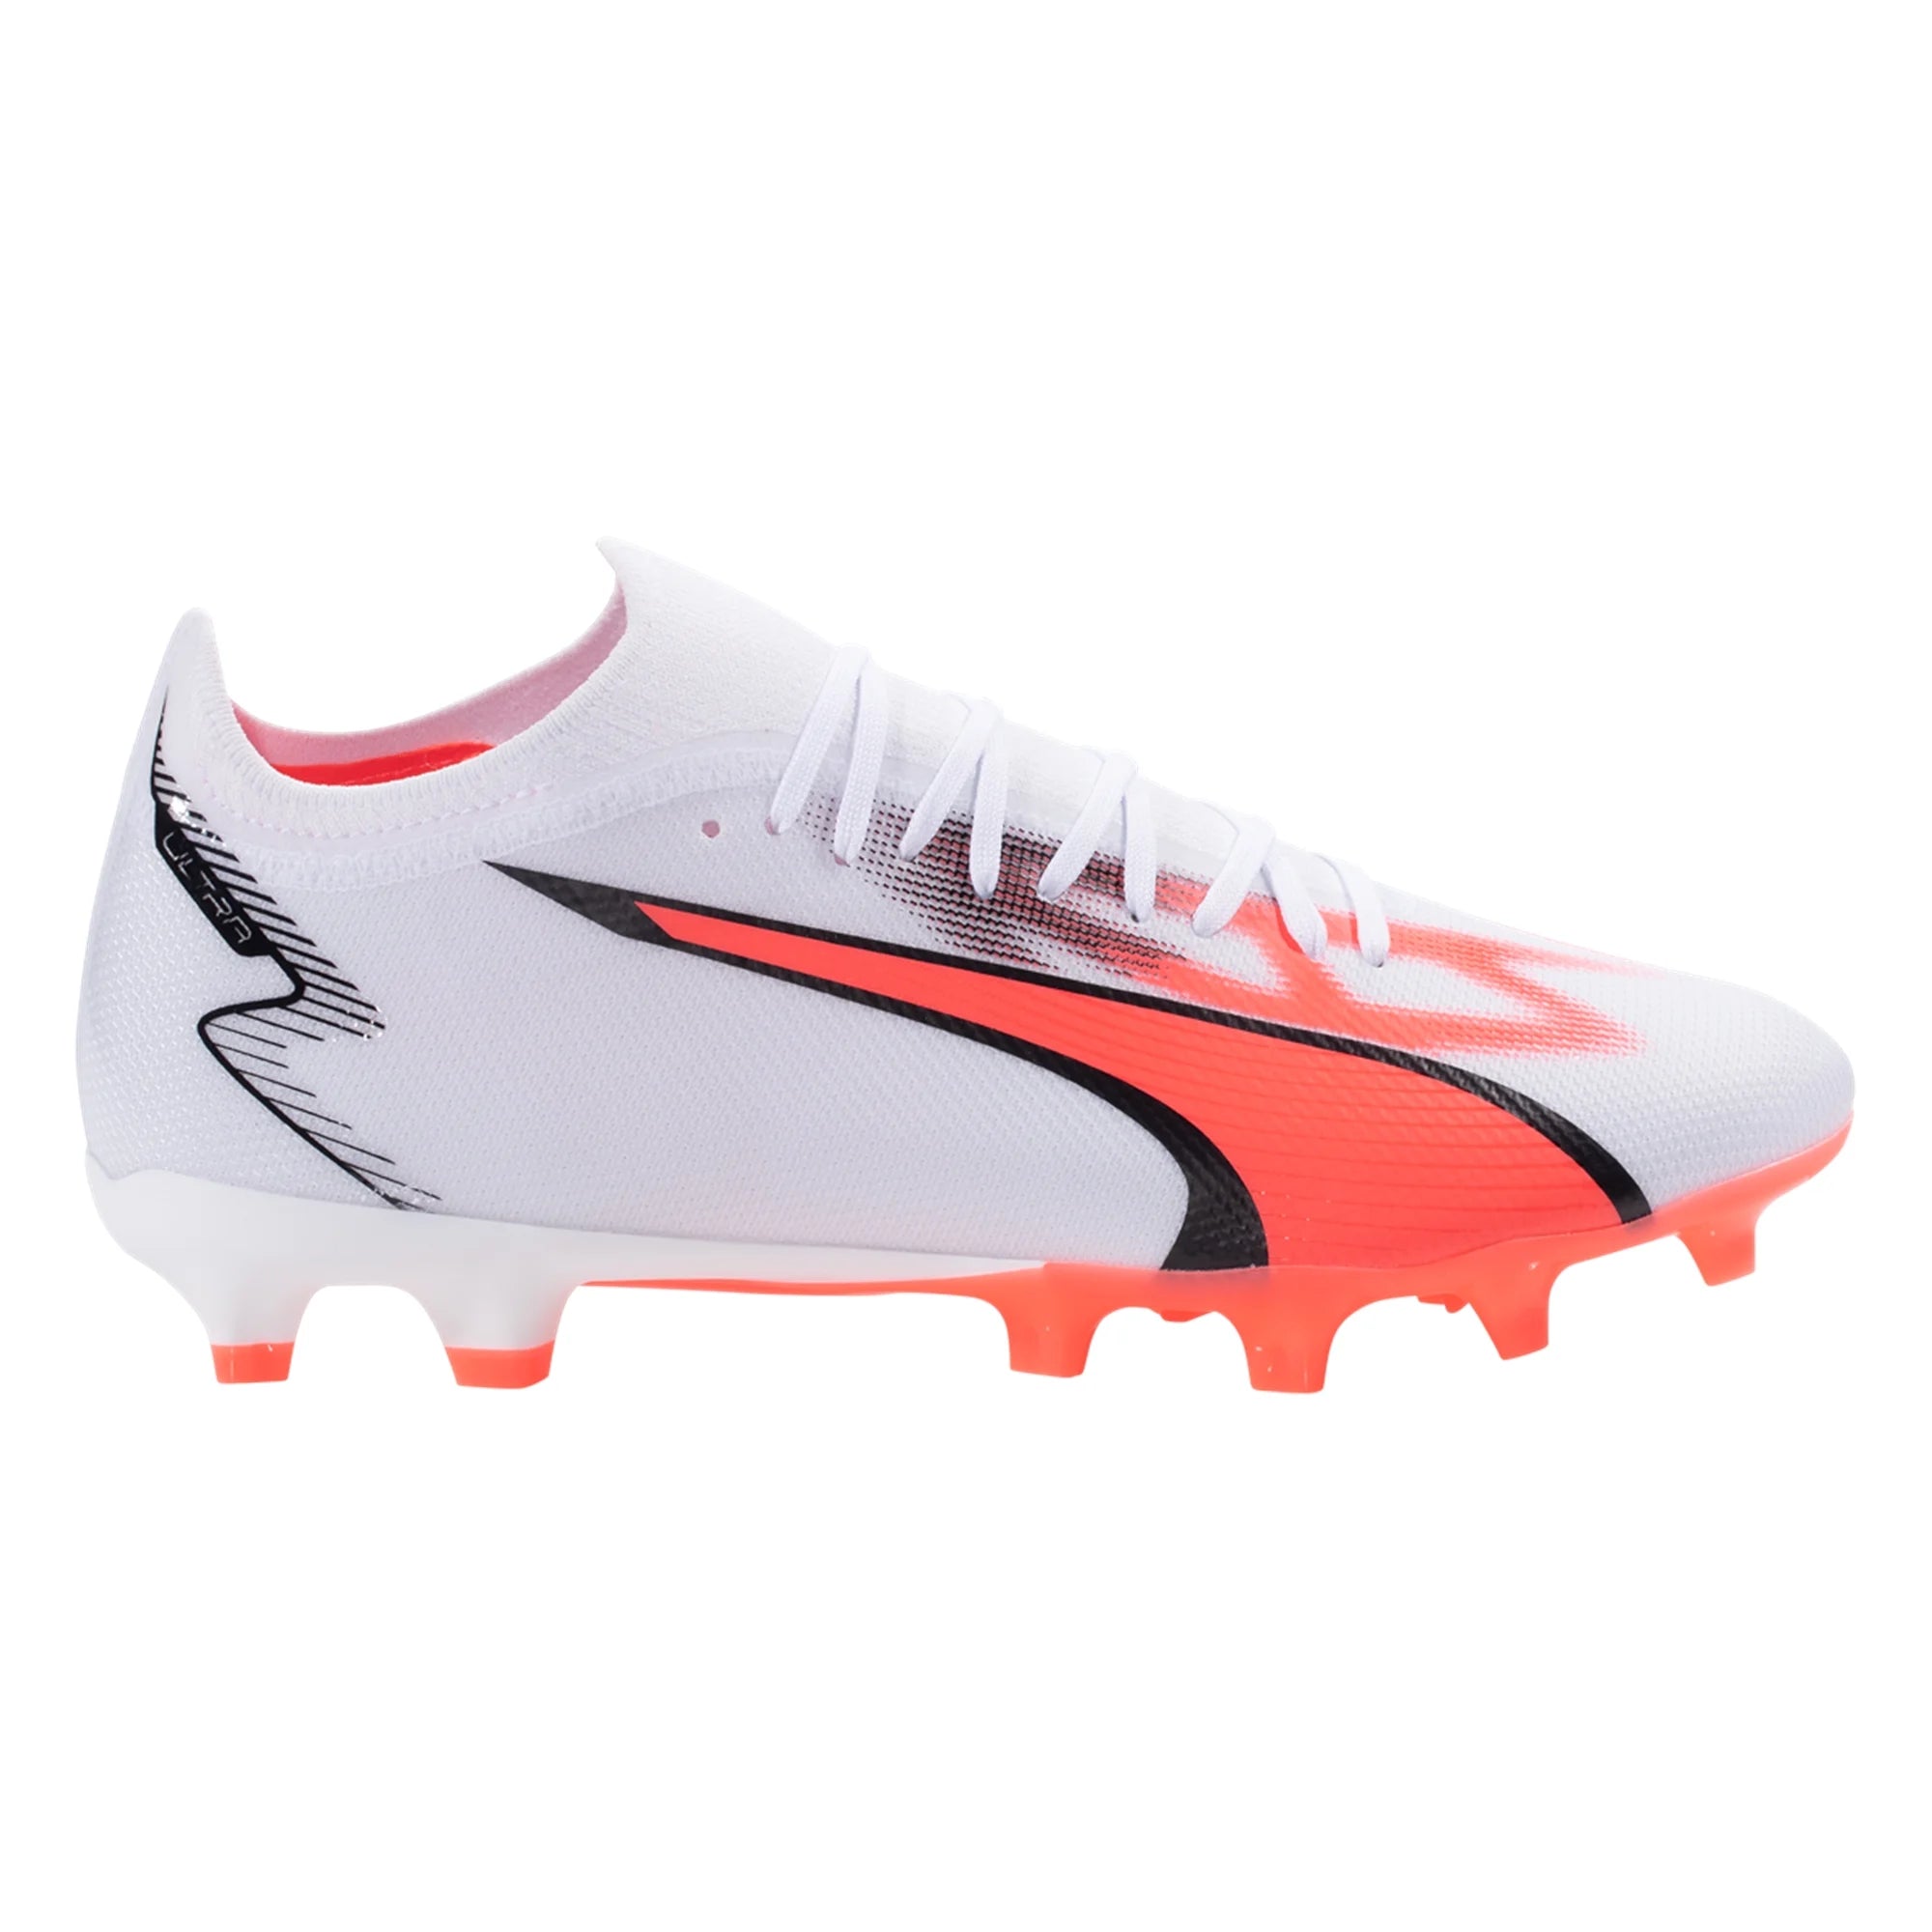 Soccer Match Zone Cleat – Ultra - 107347-01 Soccer Ground USA Puma White/Black/Fire Firm FG/AG Orchid